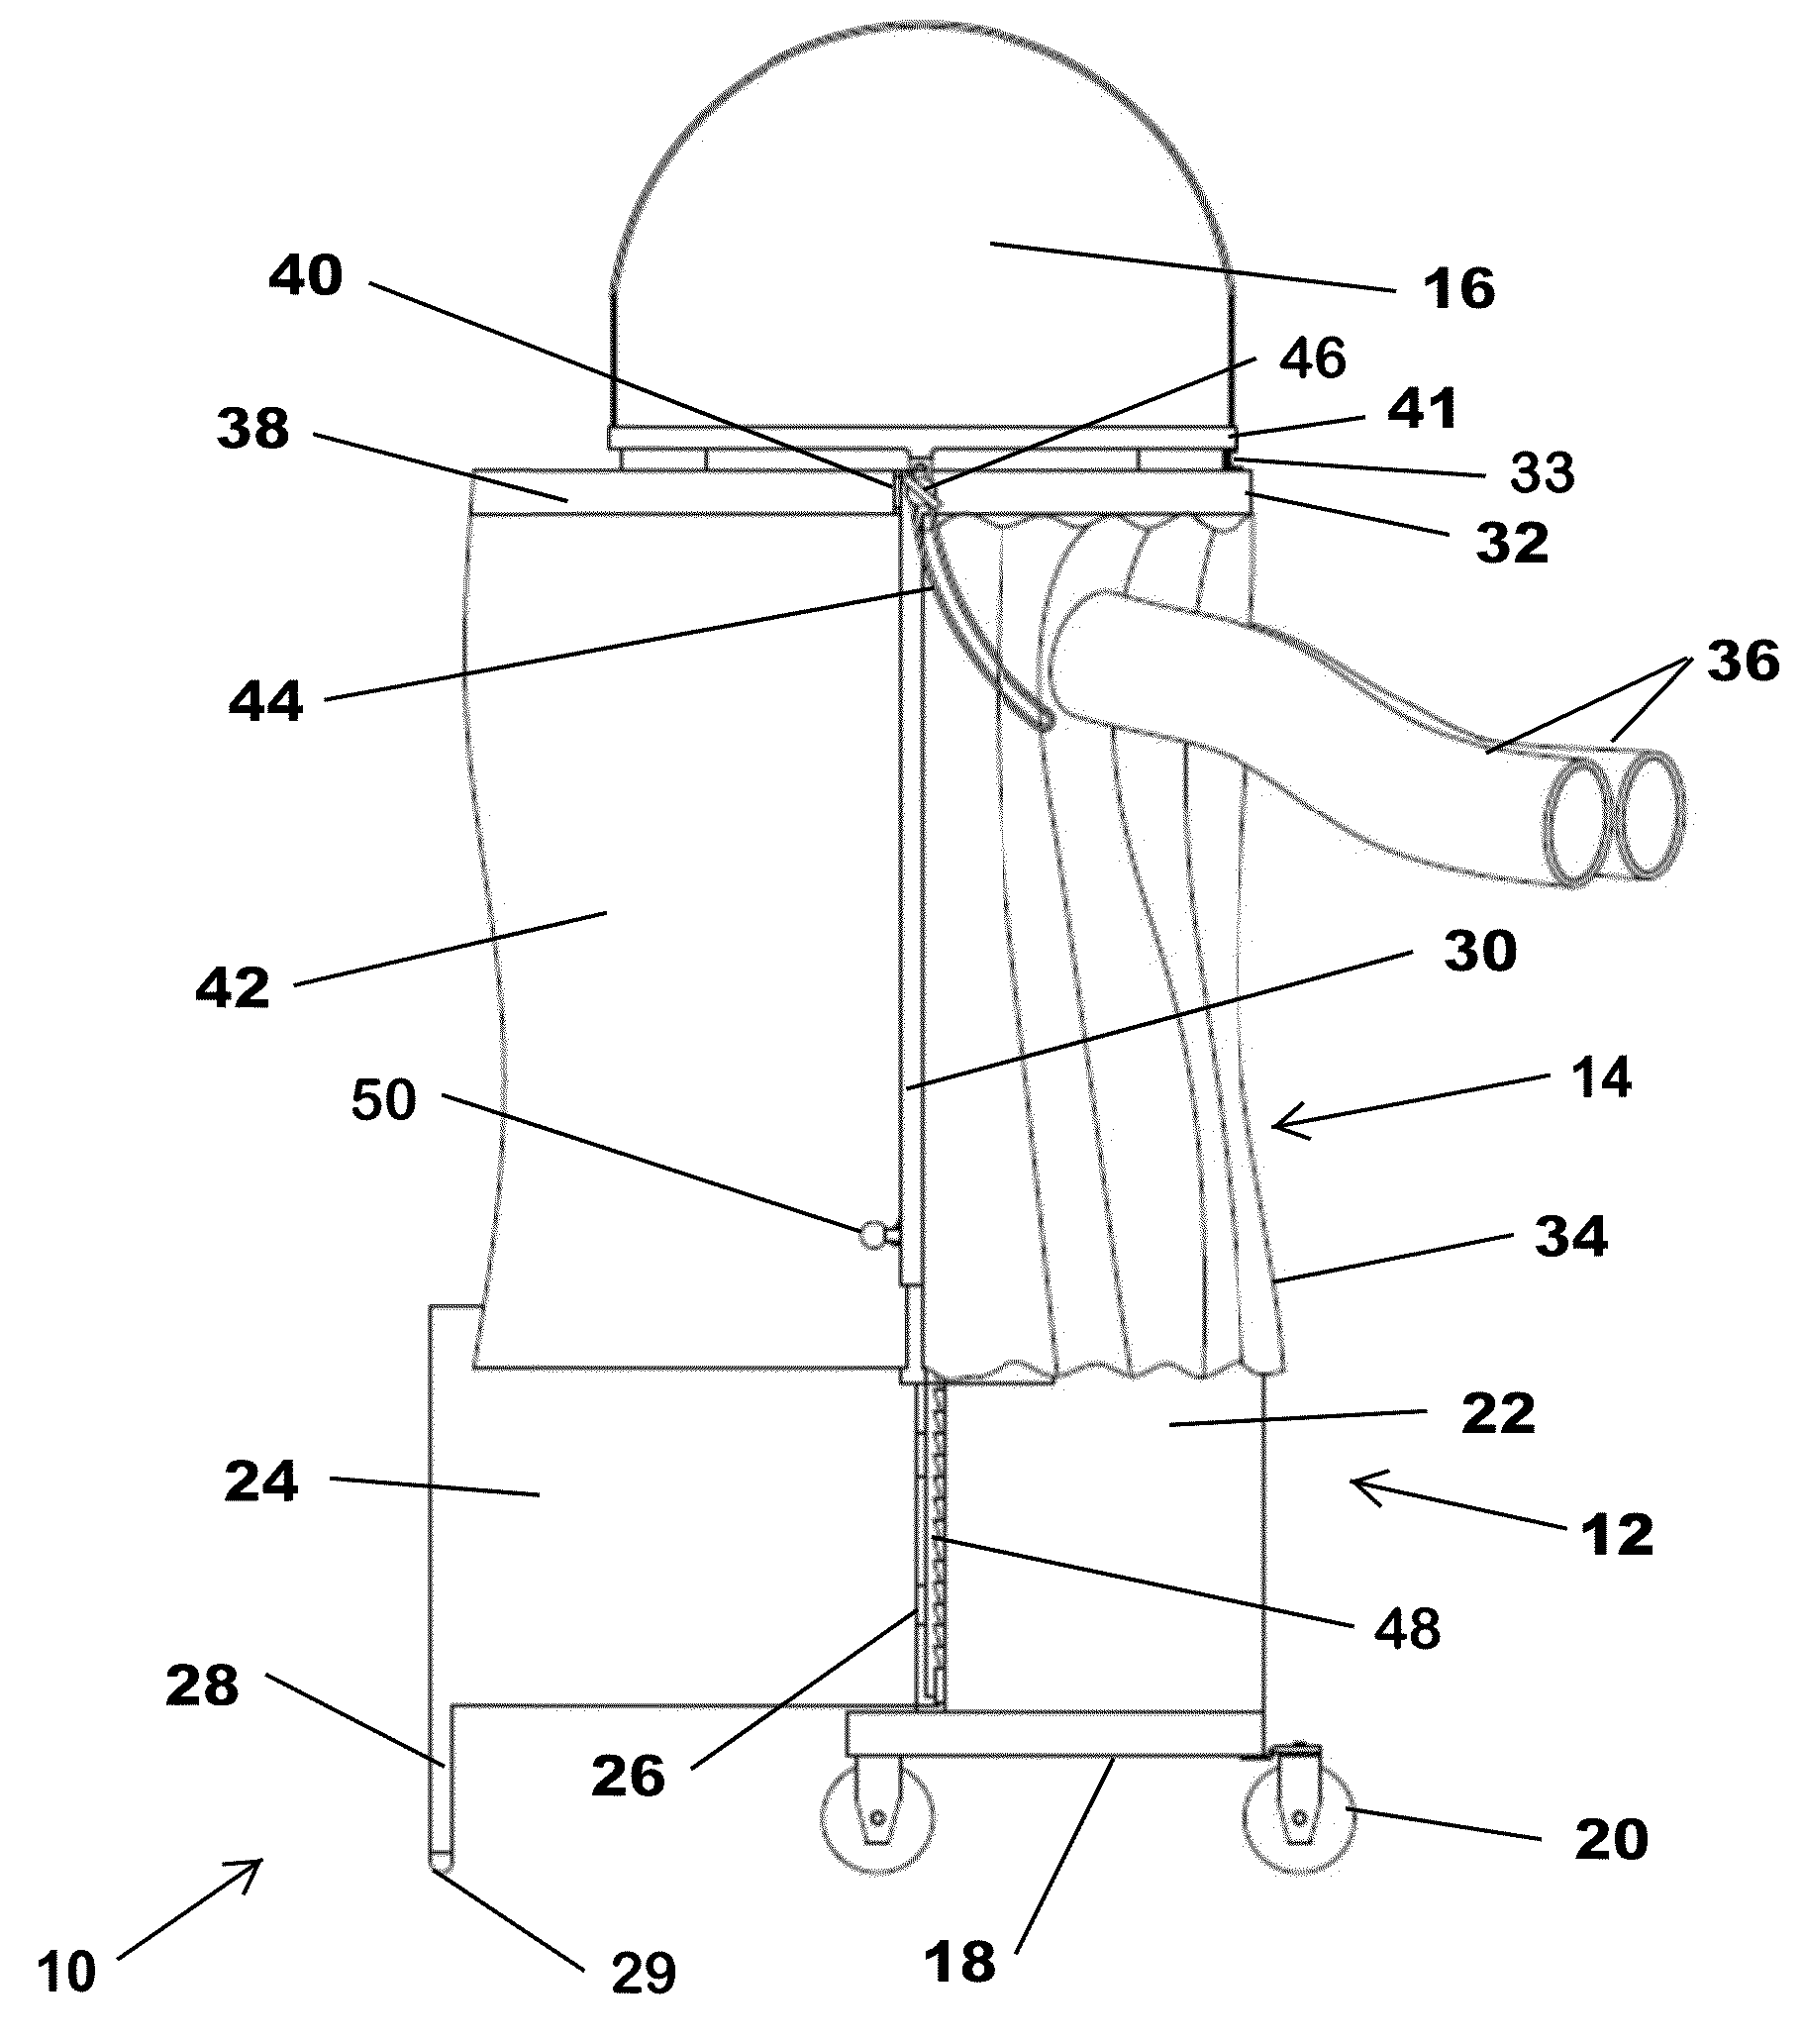 Movable radiologically protective enclosure for a physician or medical technician